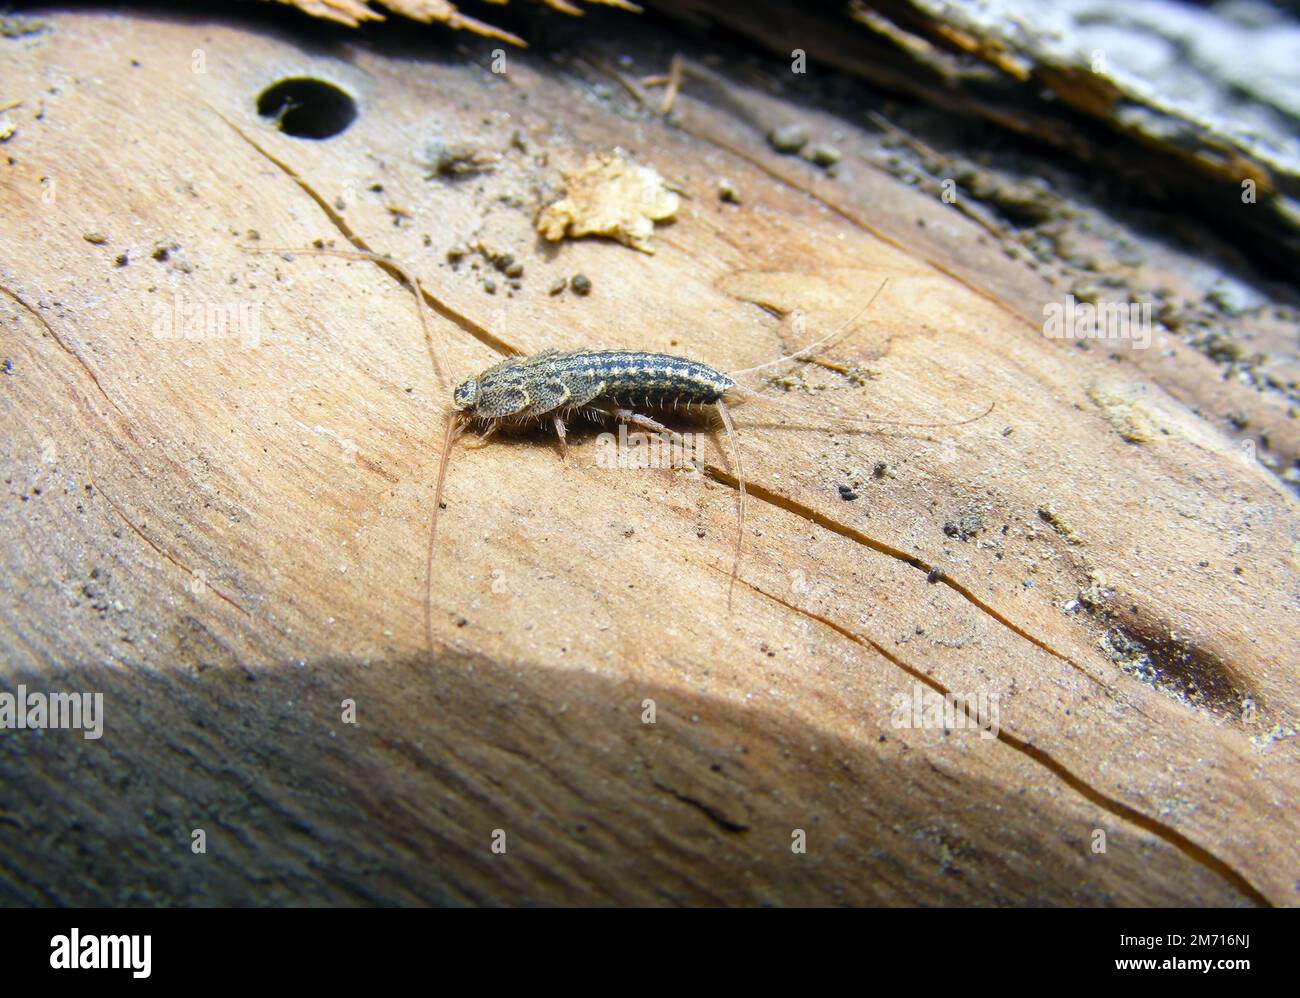 Firebrat (Thermobia domestica, Thermophila furnorum, Lepismodes inquilinus), on the dried wood. Stock Photo